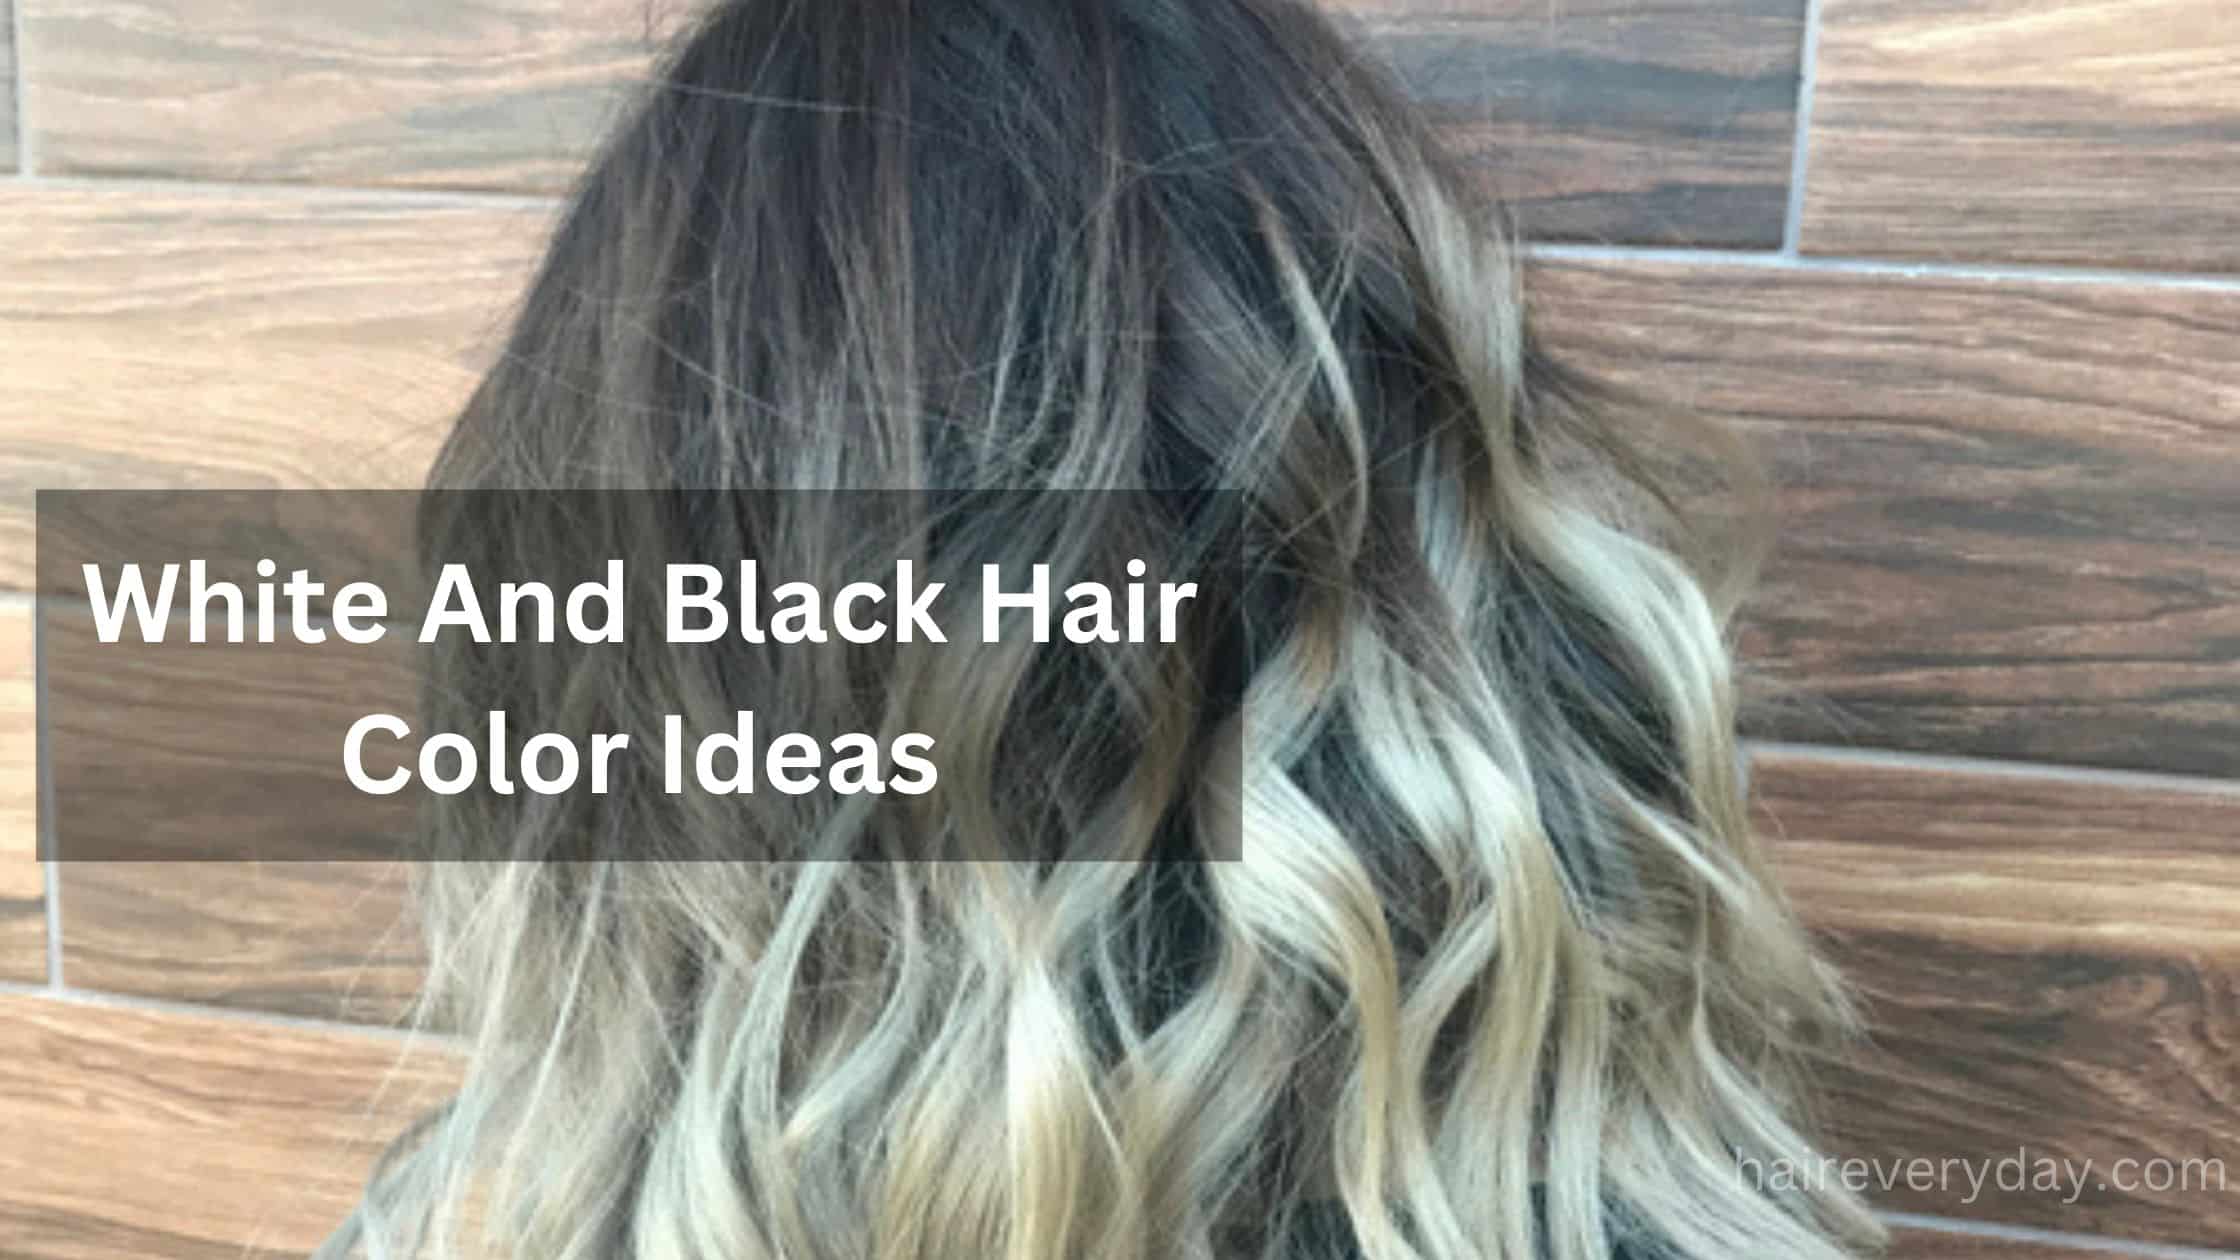 12 Amazing White And Black Hair Color Ideas 2023 - Hair Everyday Review